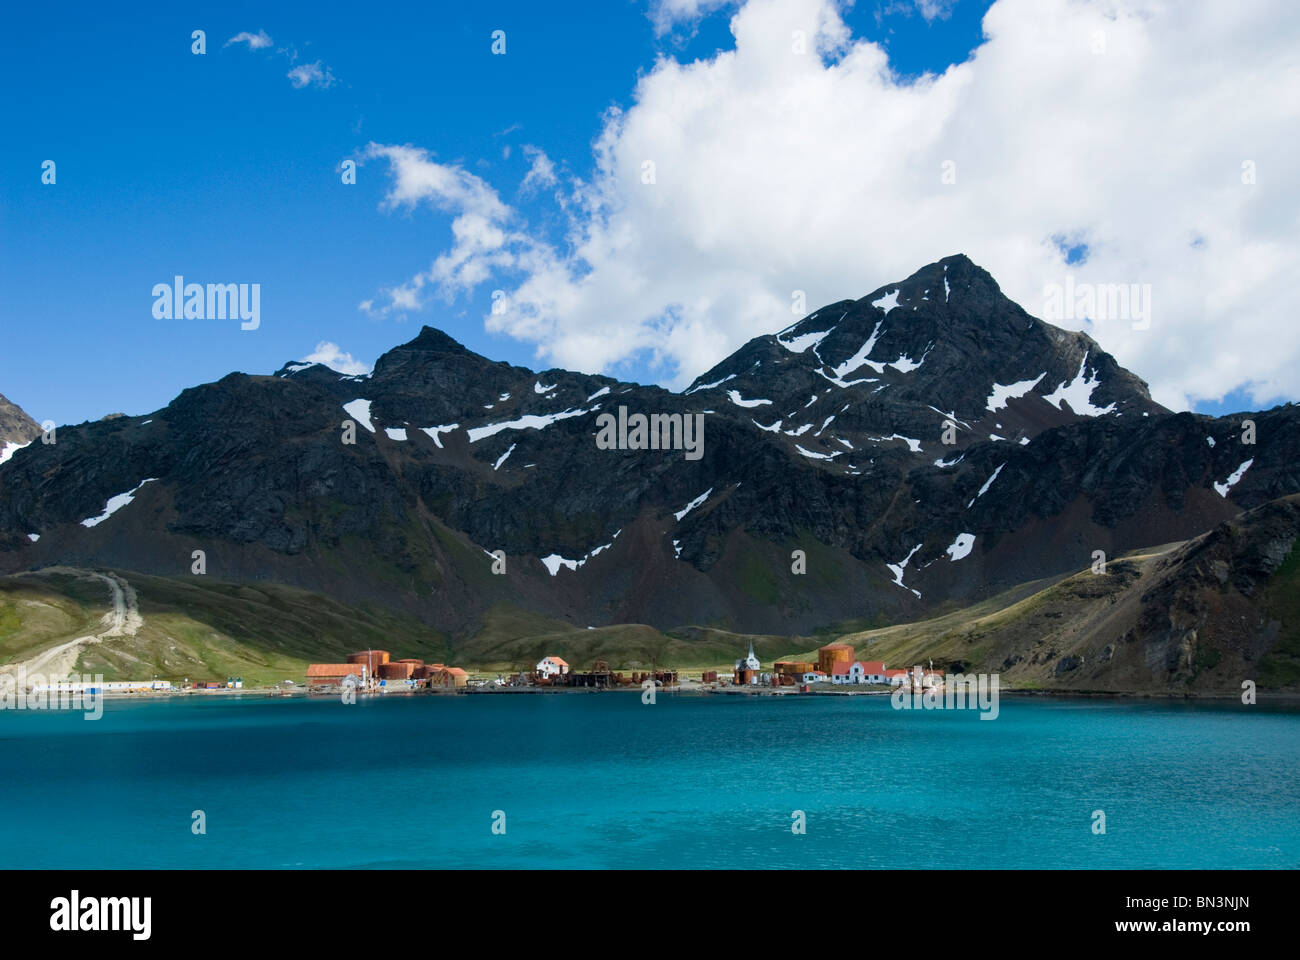 Grytviken, a former whaling station, view from boat, South Georgia Stock Photo